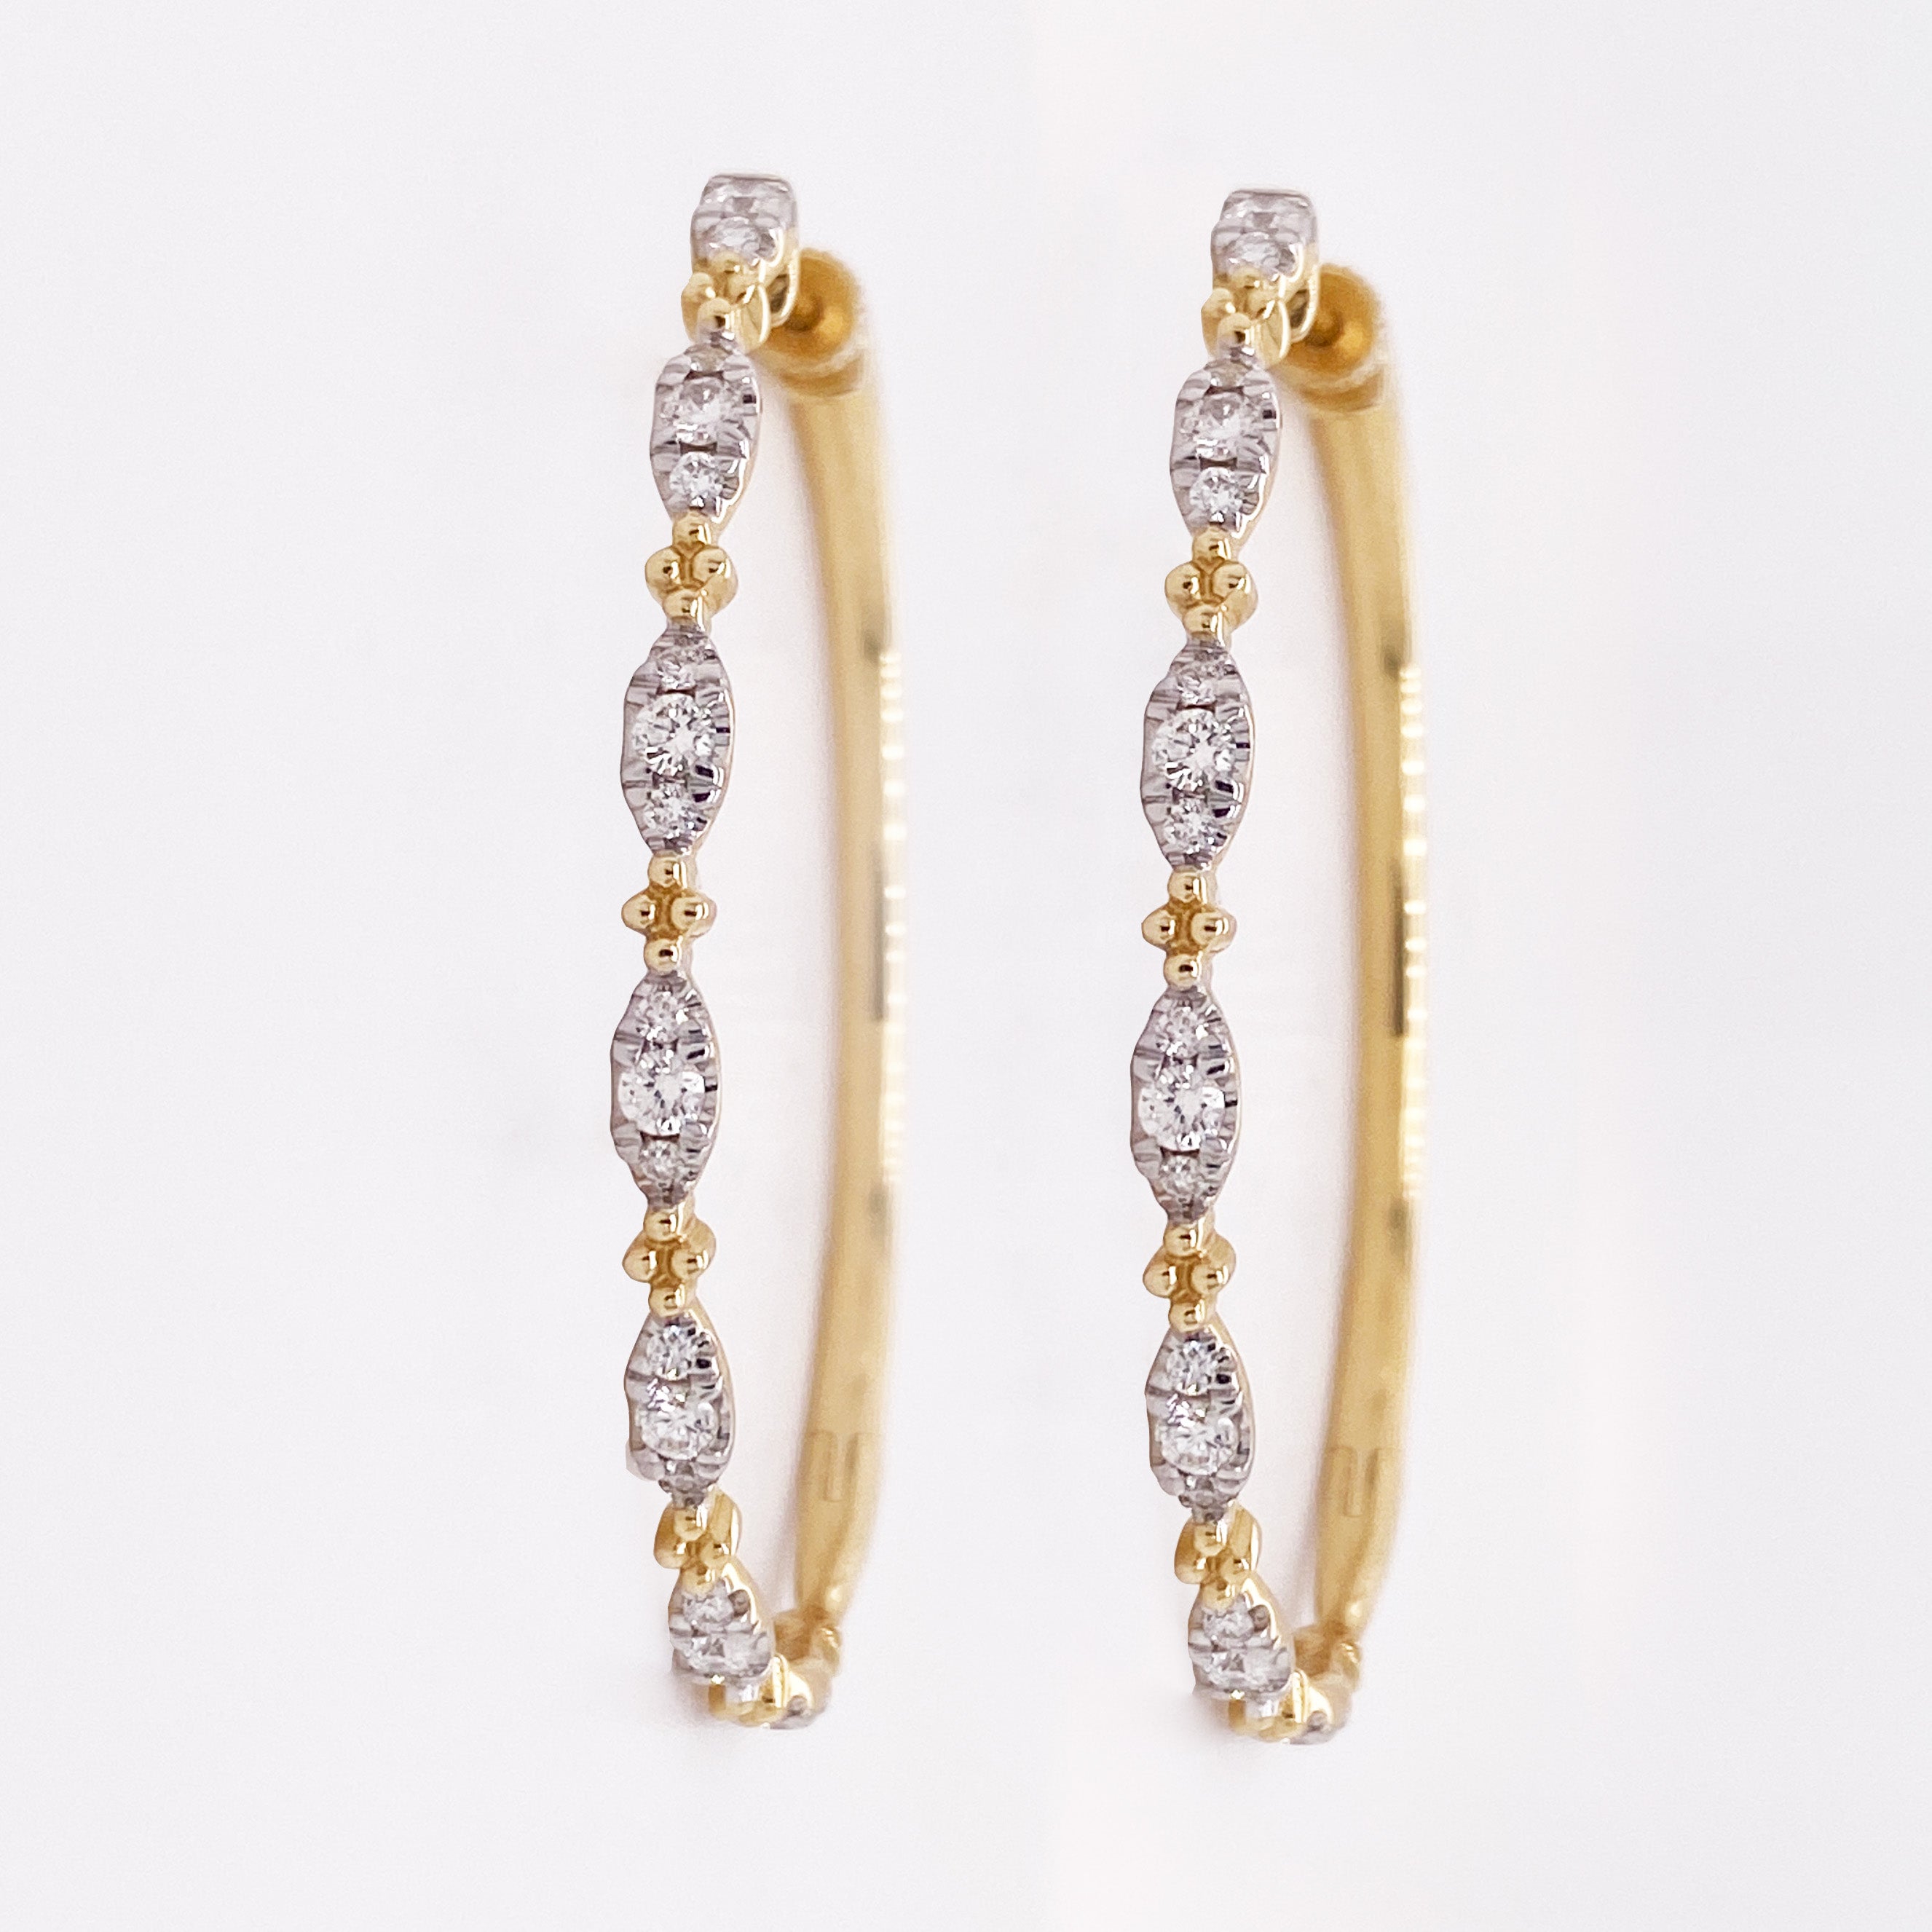 These two-tone Gabriel & Co. hoops are gorgeous and SO wearable! Diamonds in white gold alternate with small yellow gold quatrefoil clusters on these 1.57 inch long ovals for a contemporary look on a classic hoop design. They can be worn with any